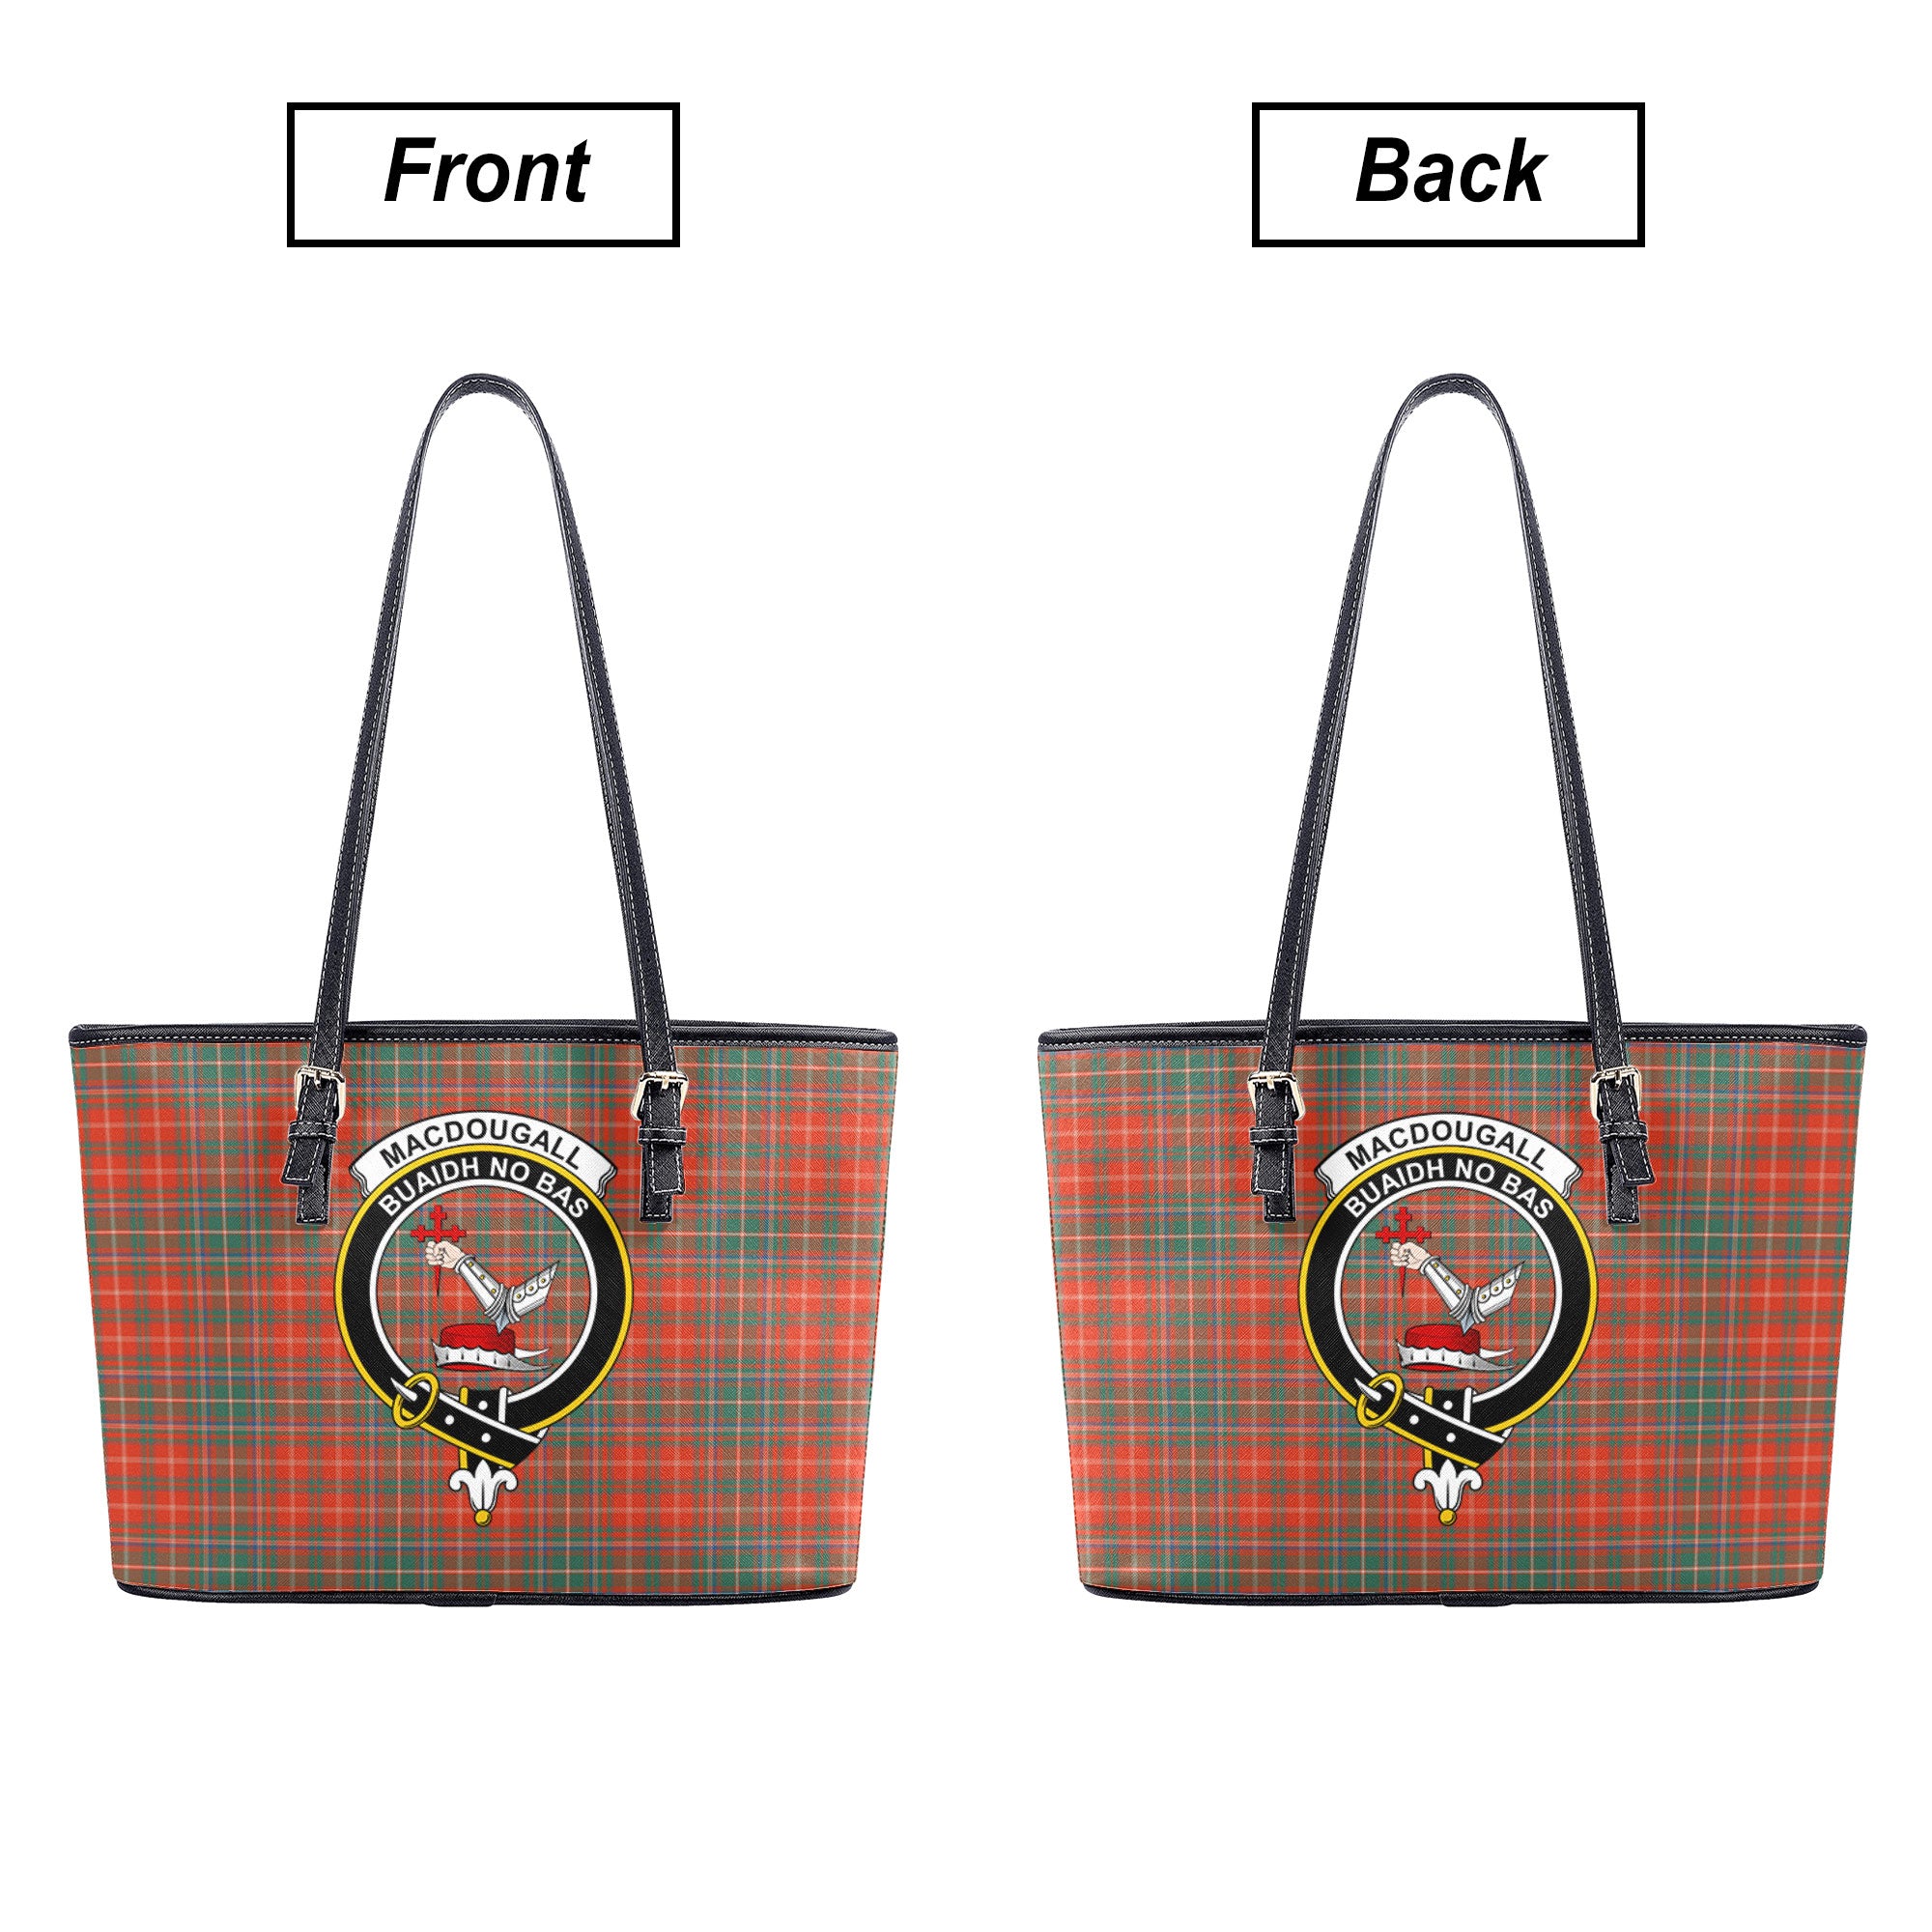 MacDougall Ancient Tartan Crest Leather Tote Bag